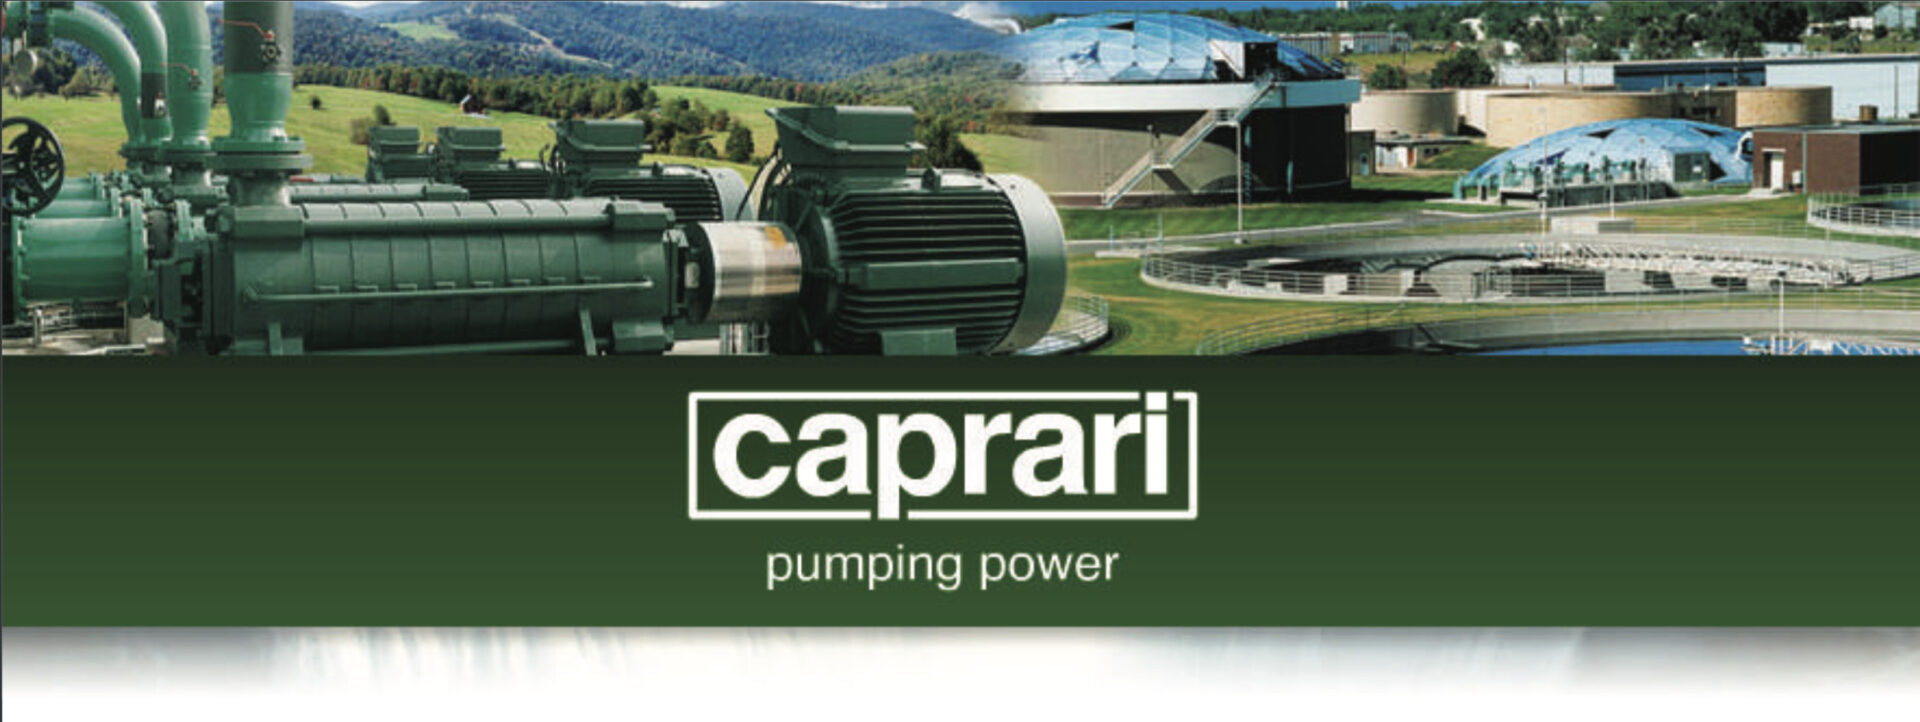 A symbol of reliability and innovation in water pumping solutions for agriculture, industry, and beyond.